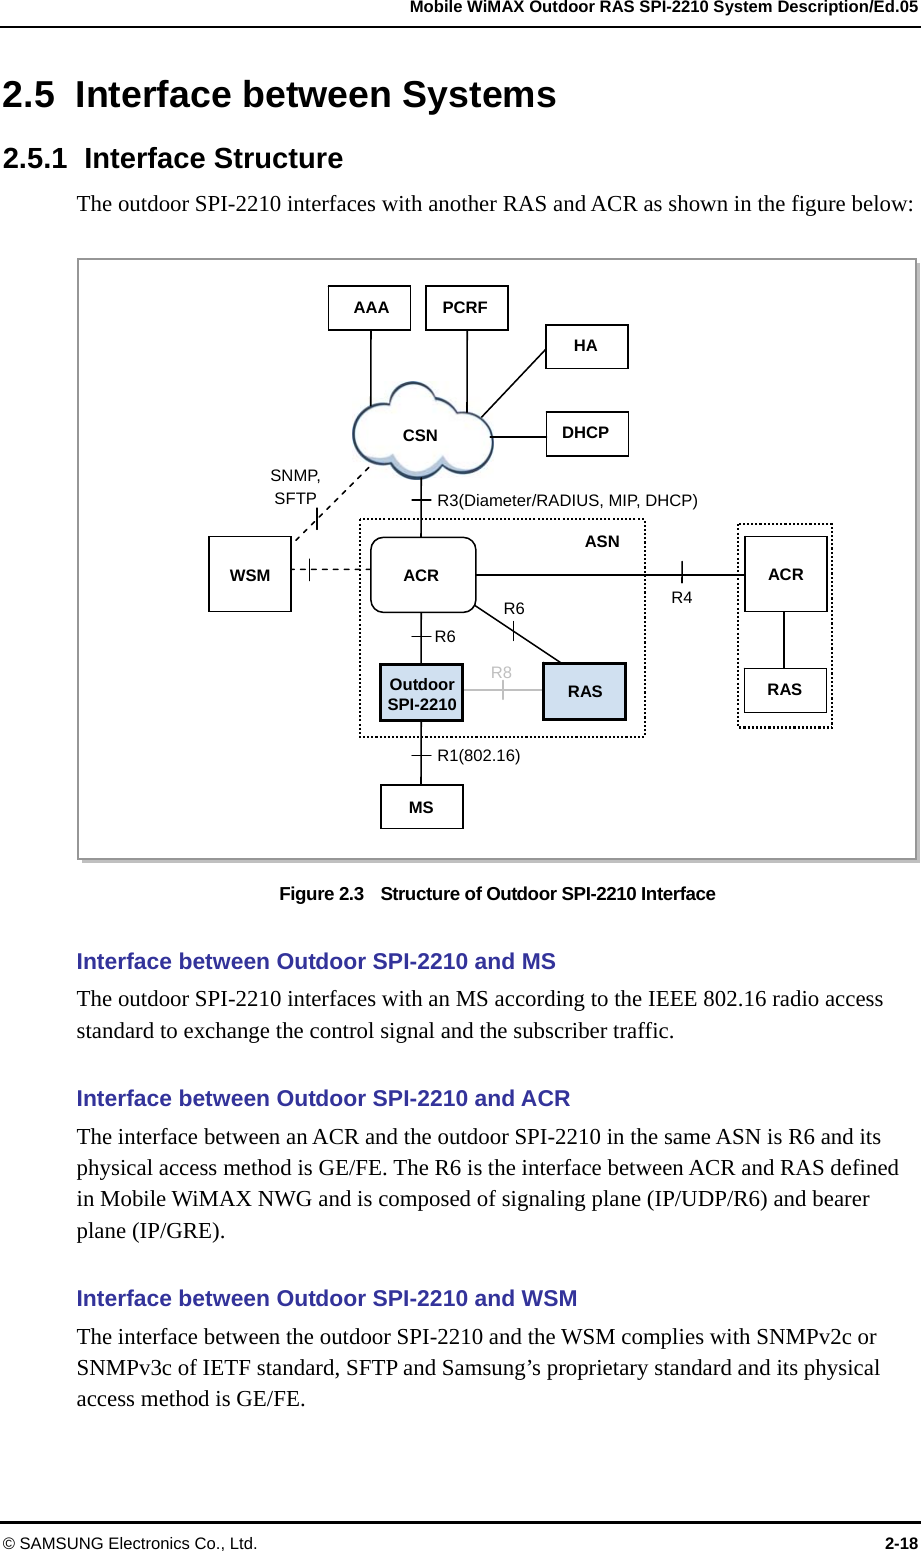   Mobile WiMAX Outdoor RAS SPI-2210 System Description/Ed.05 © SAMSUNG Electronics Co., Ltd.  2-18 2.5 Interface between Systems 2.5.1 Interface Structure The outdoor SPI-2210 interfaces with another RAS and ACR as shown in the figure below:  Figure 2.3    Structure of Outdoor SPI-2210 Interface  Interface between Outdoor SPI-2210 and MS The outdoor SPI-2210 interfaces with an MS according to the IEEE 802.16 radio access standard to exchange the control signal and the subscriber traffic.  Interface between Outdoor SPI-2210 and ACR The interface between an ACR and the outdoor SPI-2210 in the same ASN is R6 and its physical access method is GE/FE. The R6 is the interface between ACR and RAS defined in Mobile WiMAX NWG and is composed of signaling plane (IP/UDP/R6) and bearer plane (IP/GRE).  Interface between Outdoor SPI-2210 and WSM   The interface between the outdoor SPI-2210 and the WSM complies with SNMPv2c or SNMPv3c of IETF standard, SFTP and Samsung’s proprietary standard and its physical access method is GE/FE. CSN AAA ACR R3(Diameter/RADIUS, MIP, DHCP) R6 R1(802.16) R4 SNMP, SFTP PCRF MS WSM Outdoor SPI-2210 RASR6 R8 ACRRAS HA ASN DHCP